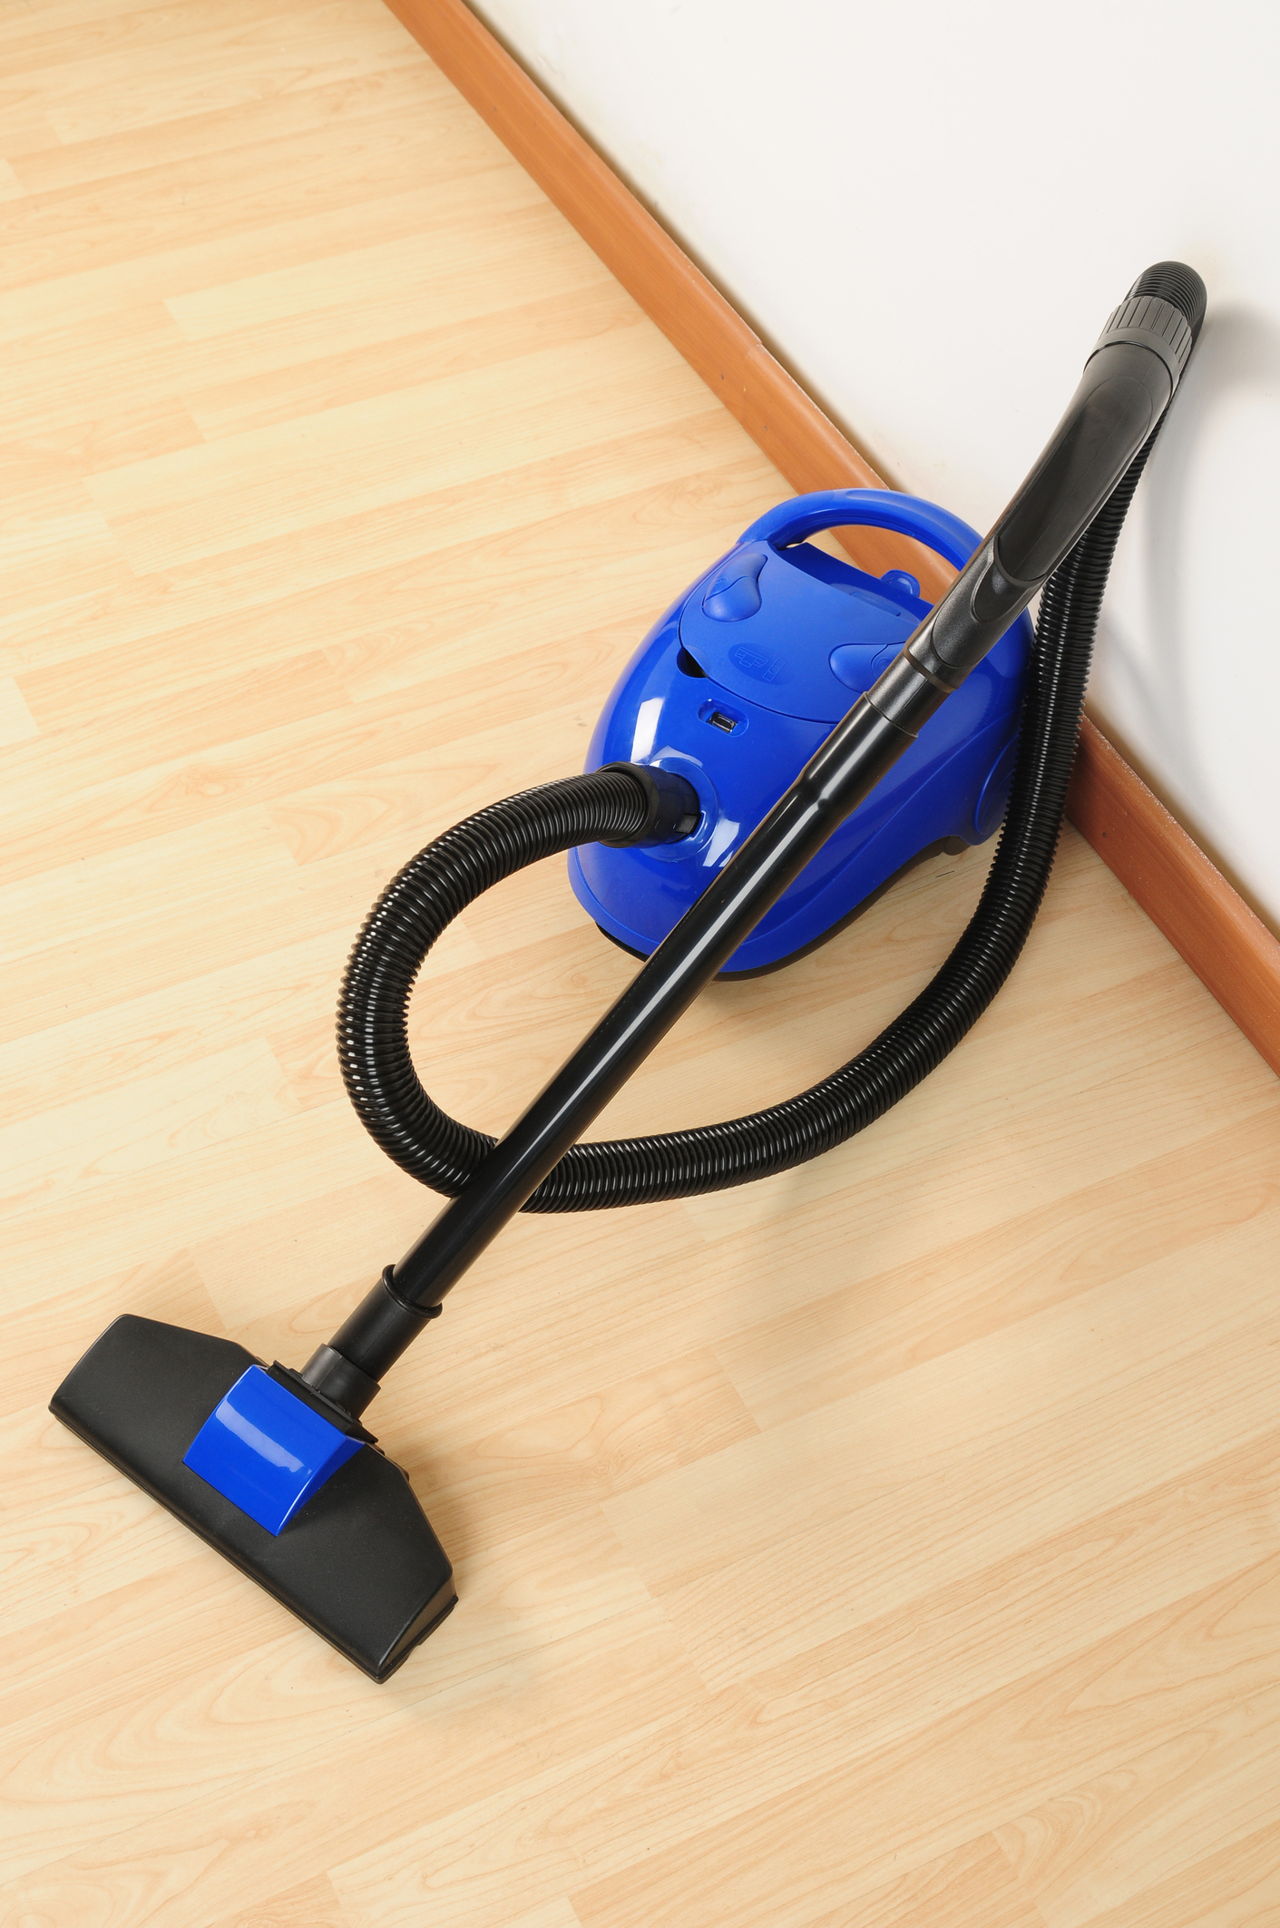 Clean Laminate Floors Without Streaking, Can I Vacuum Laminate Floors